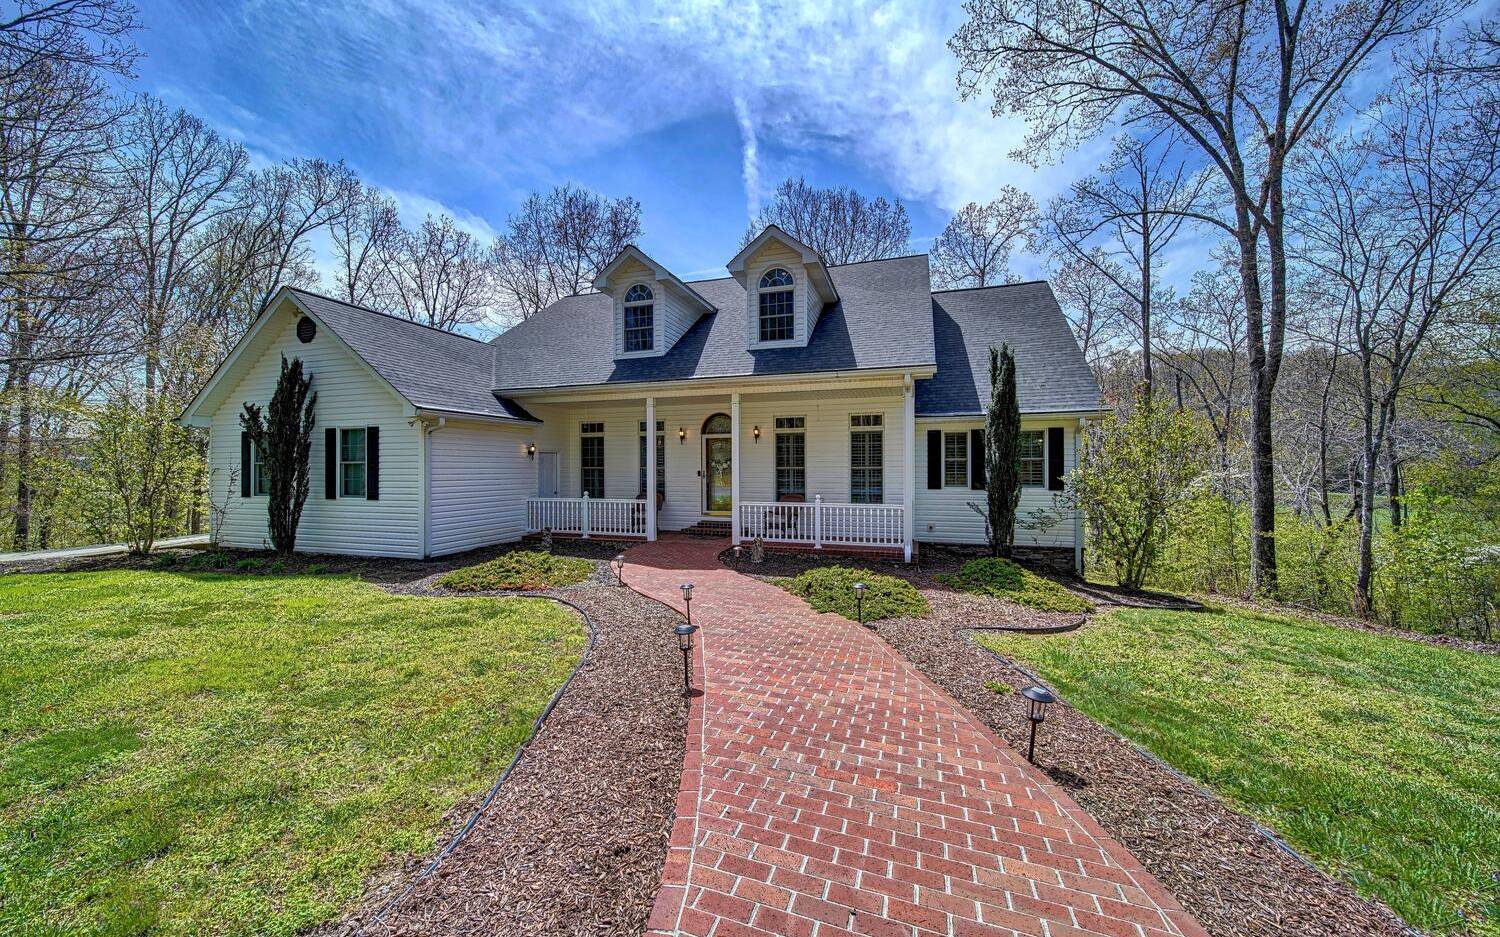 This stately home provides you all the privacy you could hope for but is conveniently located w/in 5 mi of Downtown Blue Ridge, Ingles Grocery, hospitals & schools! Year Round creek, mountain & pastoral views! You'll be in awe as soon as you walk in. The main floor consists of a formal dining space, butler's pantry, eat-in kitchen w corian countertops & custom cabinetry, living room w cathedral ceilings, spacious MBR en suite, office, laundry room, 1/2 bath & a 2 car garage. The upper level has 3 br's & a full bath + a craft room. Full, partially finished terrace level offers bonus family/rec room, gym, full bath, & loads of storage space! This 9.06 acres boasts over 1000' of noisy creek frontage (Sugar Creek), a small fishing pond, a 20x40 detached garage w storage space above, a detached carport (perfect for rv or boat), a lean-to shed & a 24x30 storage building!